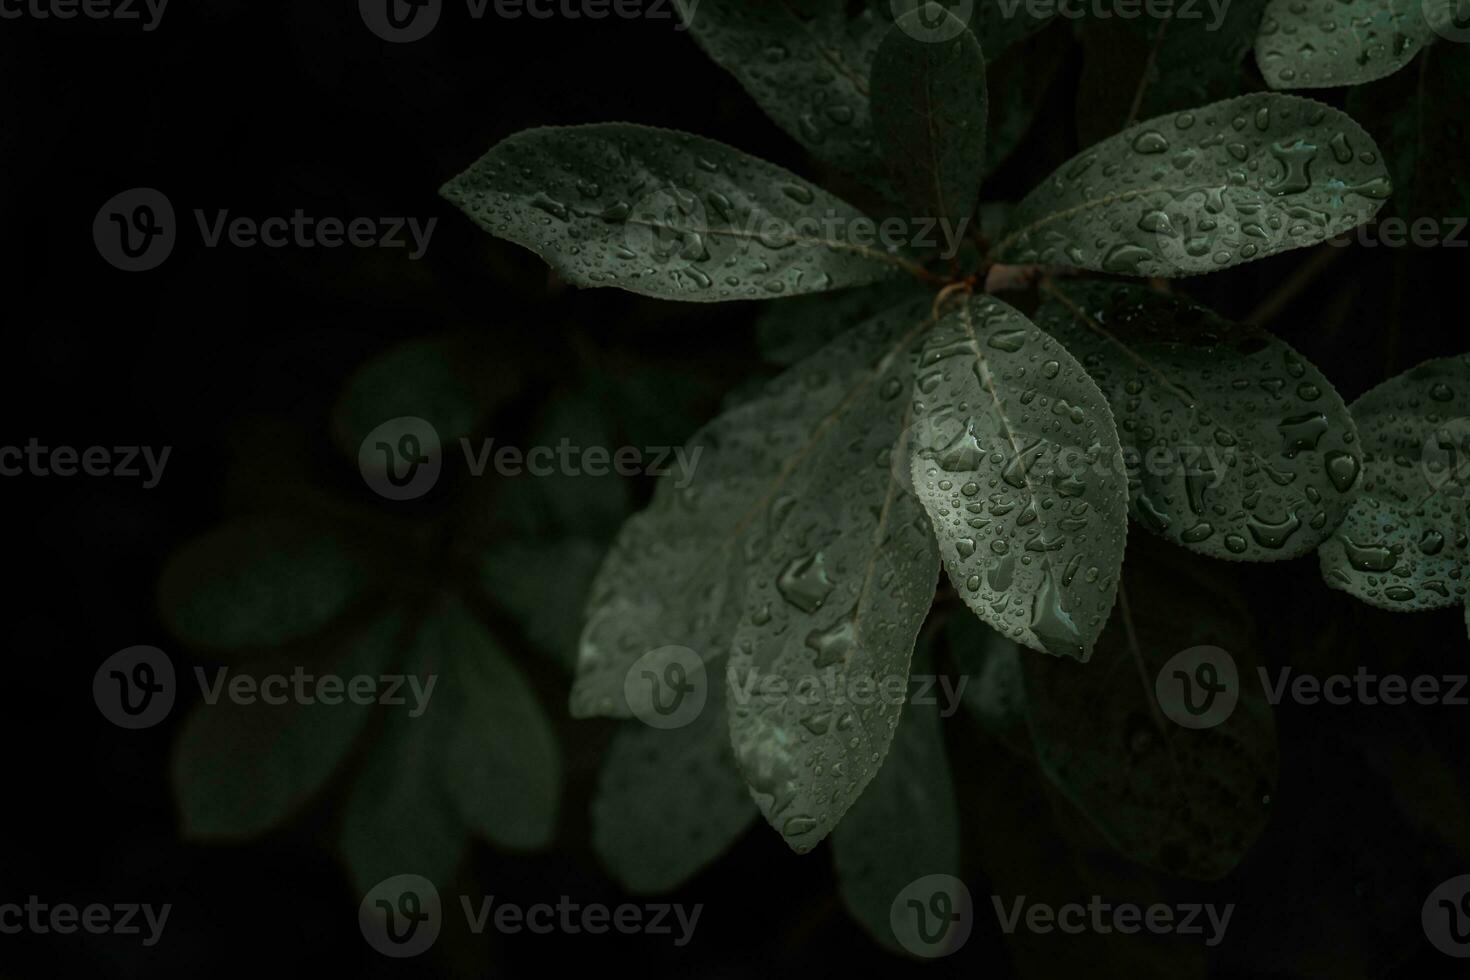 Flat lay, dark nature concept, with rain droplets, dark green foliage texture backgrounds photo